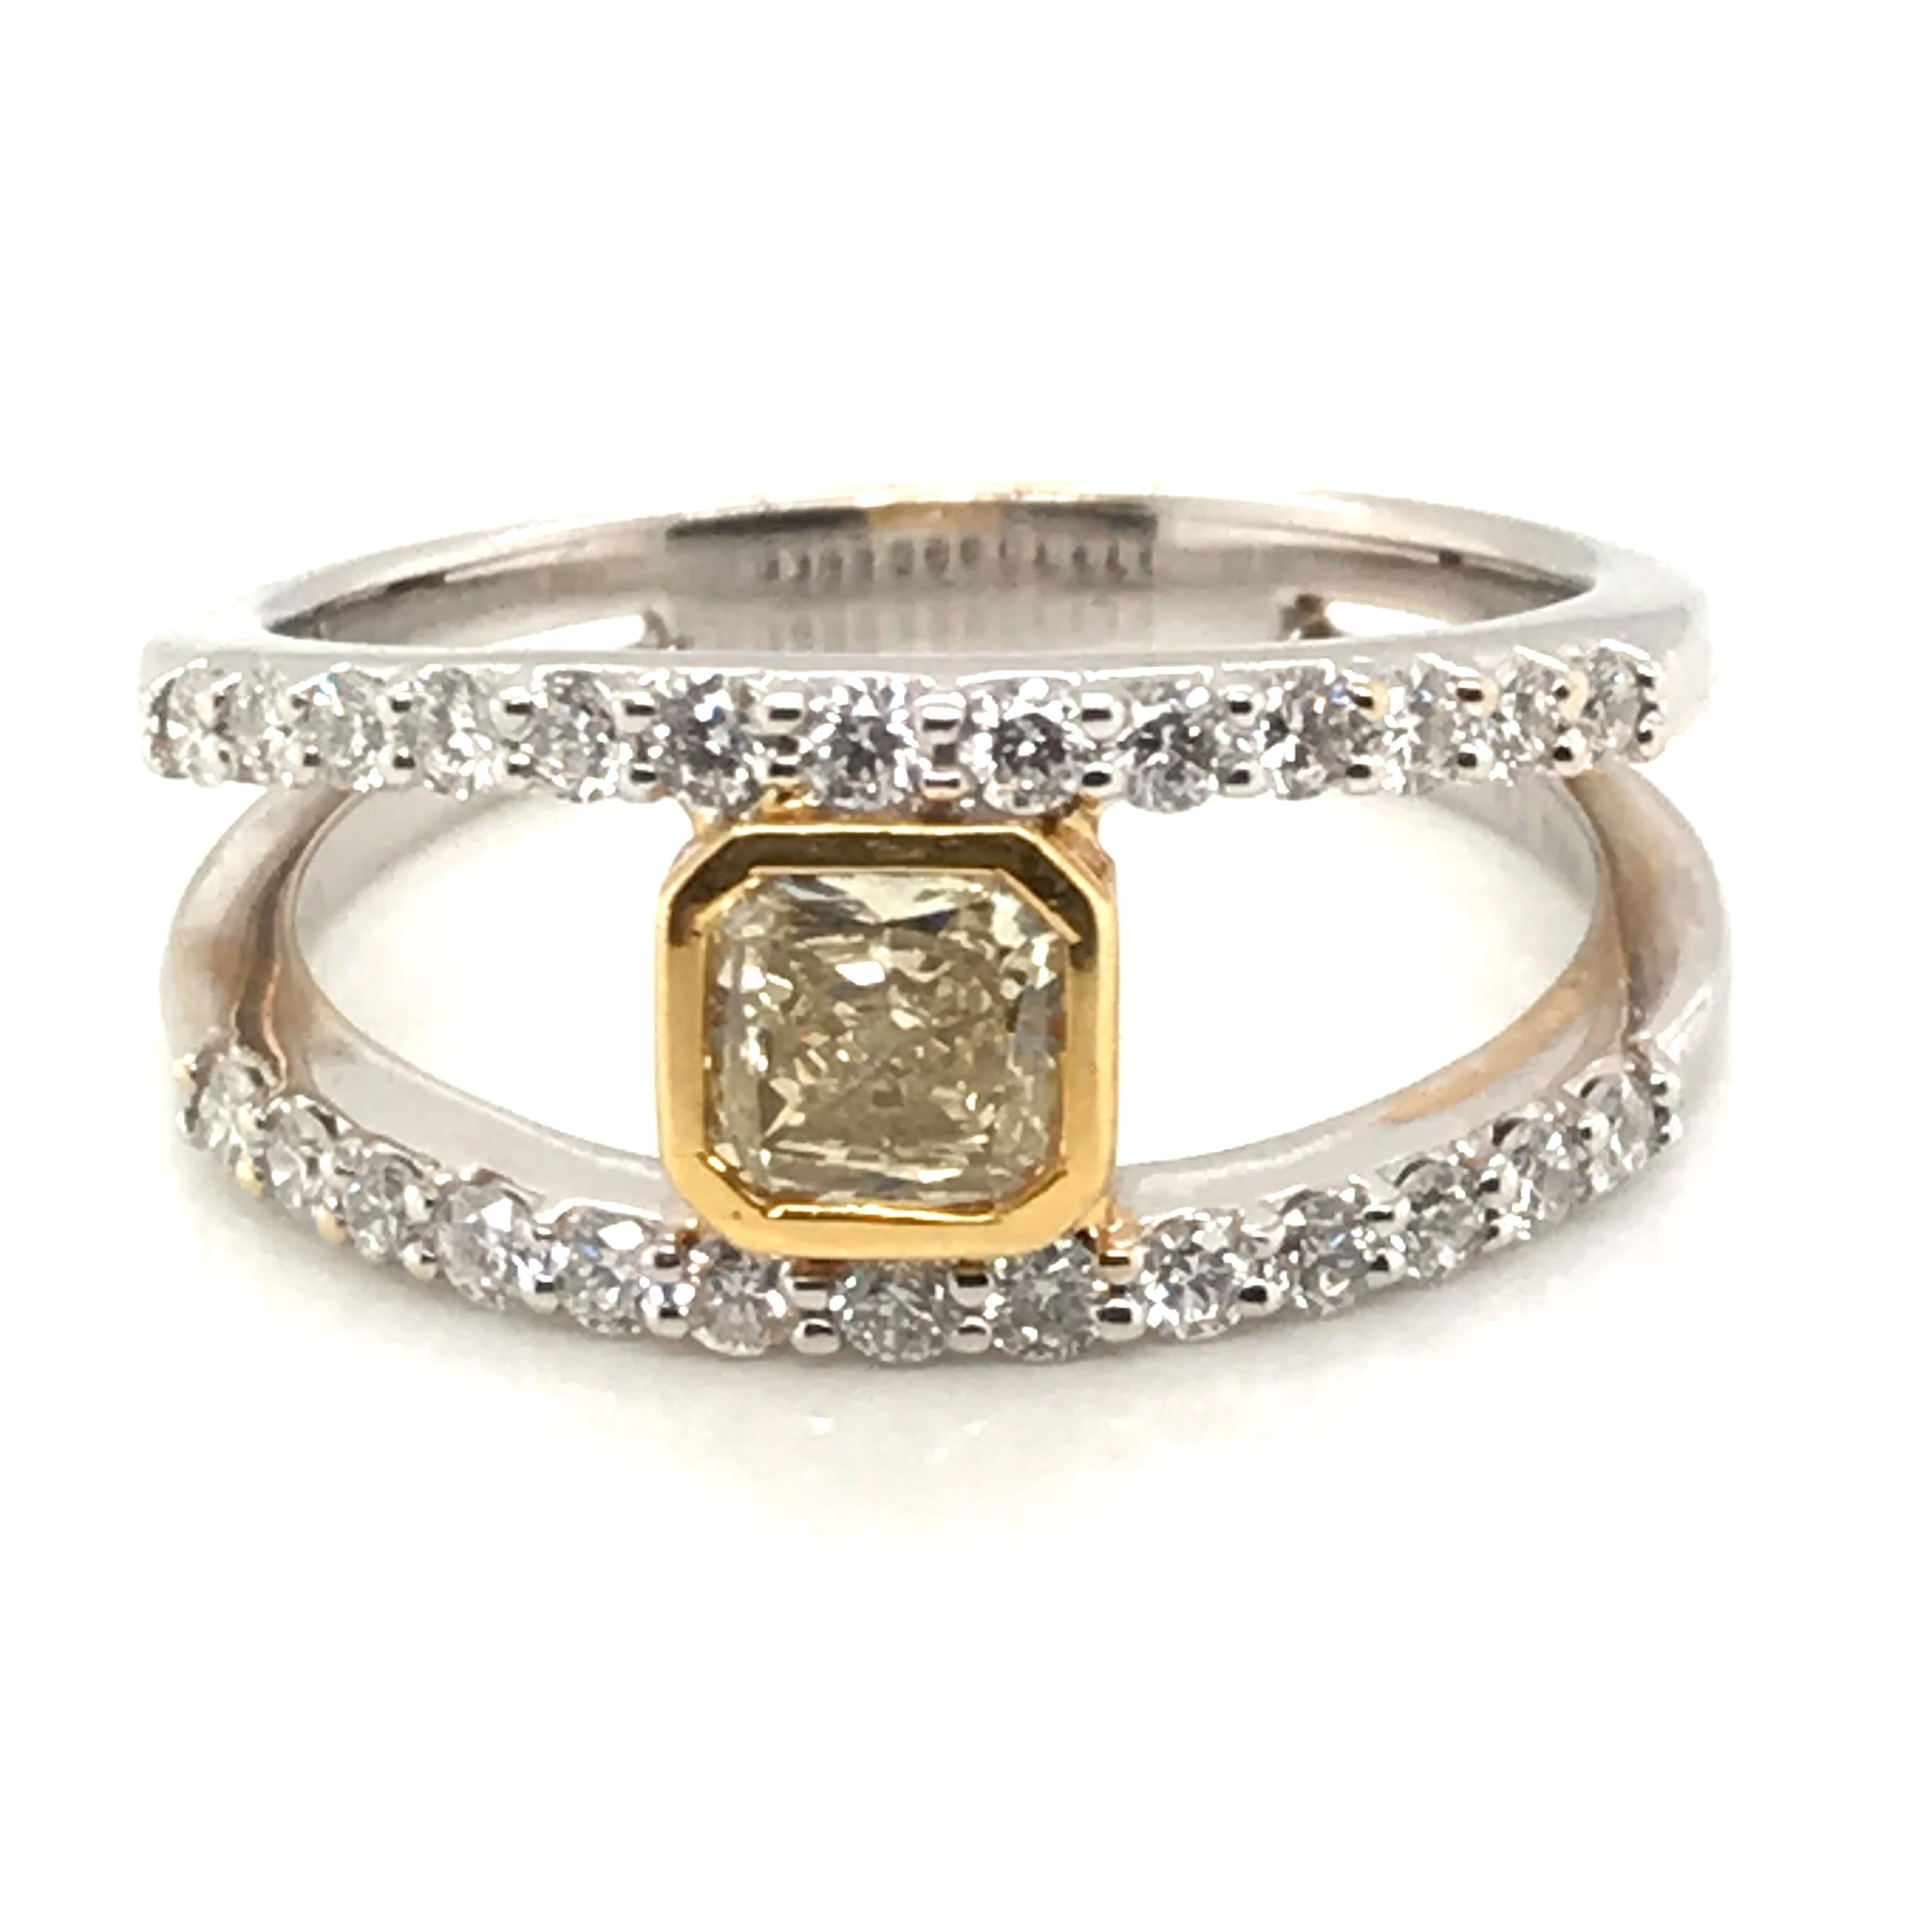 HJN Inc. Ring featuring a 1.00 Carat Natural Fancy Yellow Diamond Ring with 18K White and Yellow Gold

Natural Fancy Yellow Diamond: 0.50 Carats
Round-Cut Diamond Weight: 0.50 Carats

Total Stones: 27
Clarity Grade: SI1
Color Grade: H
Total Diamond